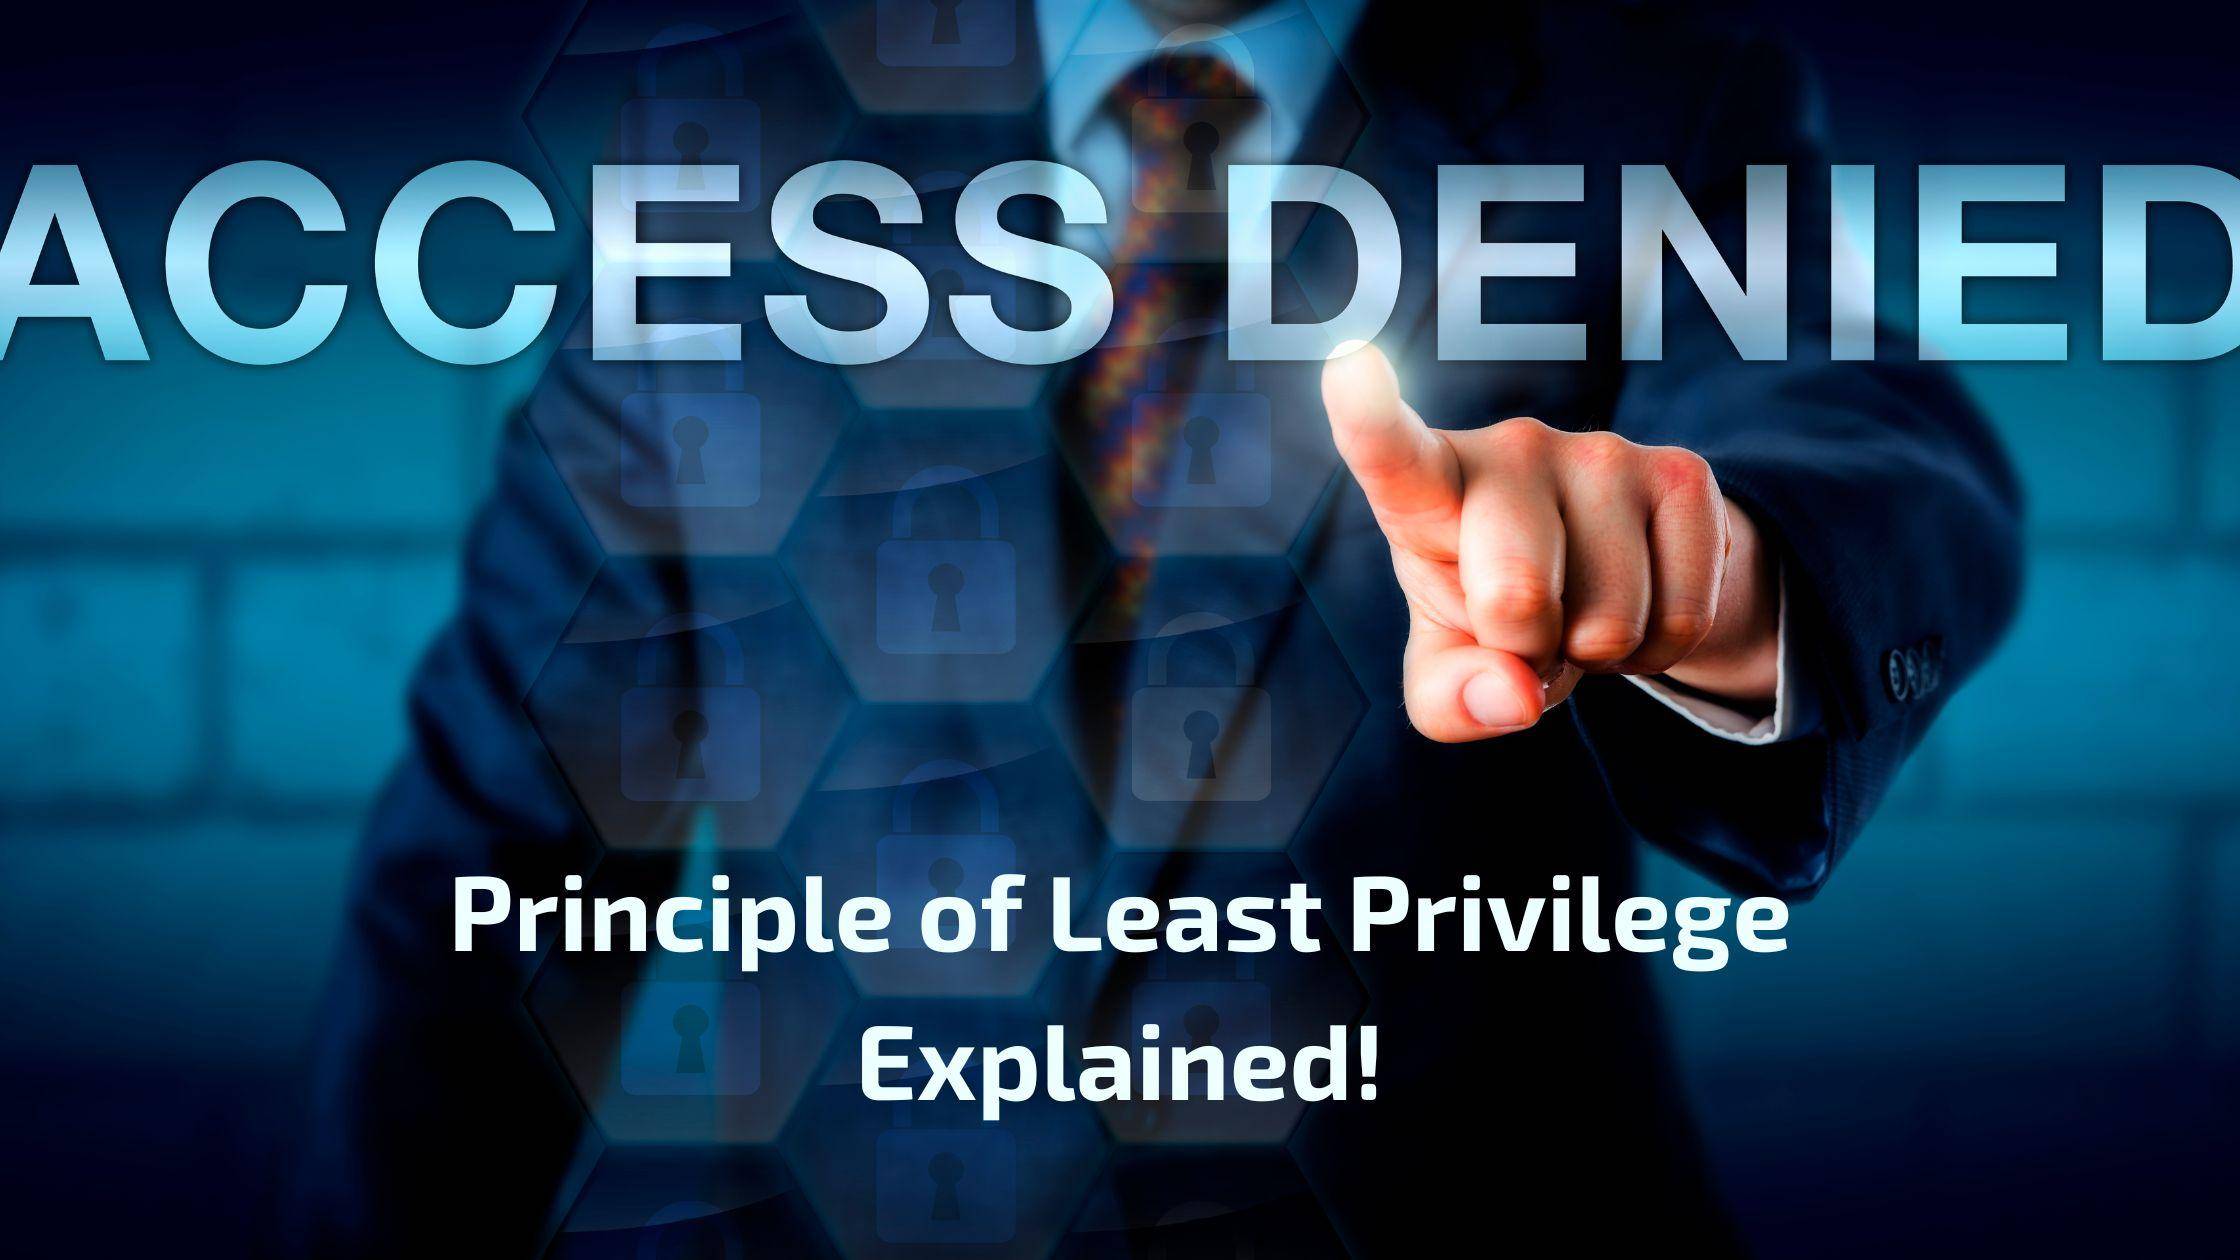 What Is Principle of Least Privilege & Why Do You Need It?